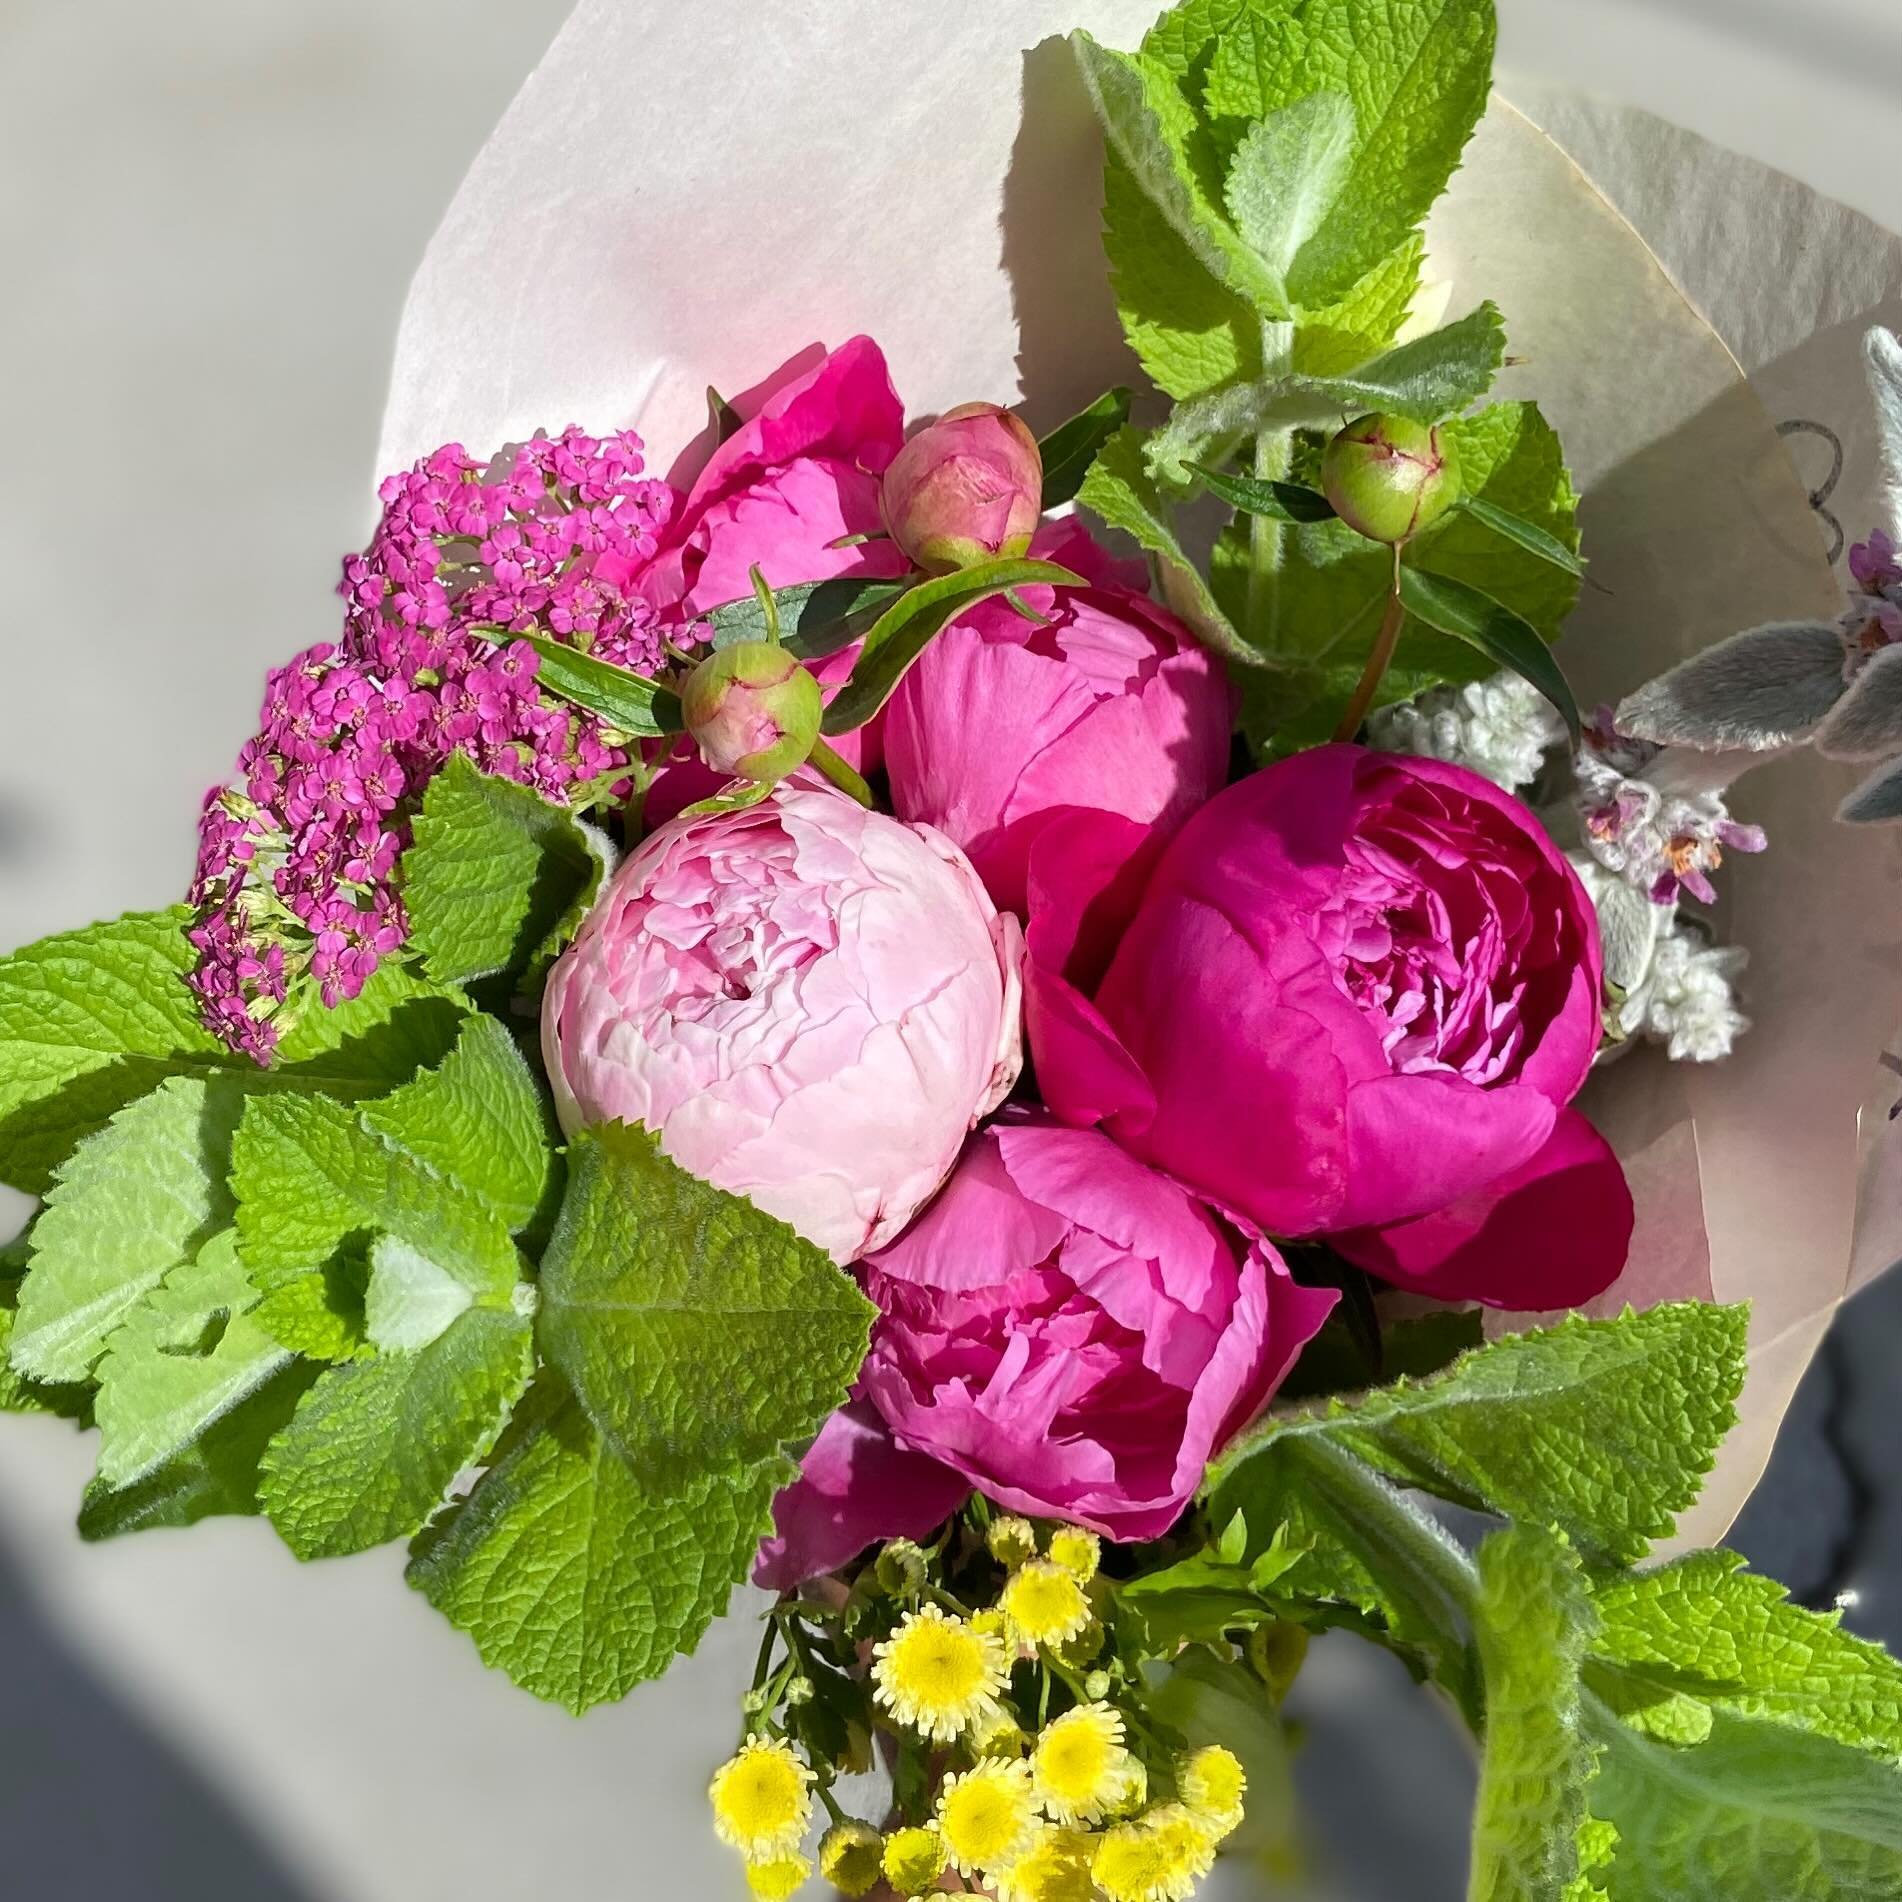 Do you need a gift for someone special this Mother&rsquo;s Day? How about a meaningful gift of flowers for an entire summer- something special every week, not just one day in May! Storybook Flower Bouquet Subscriptions are just that: ephemeral, subli